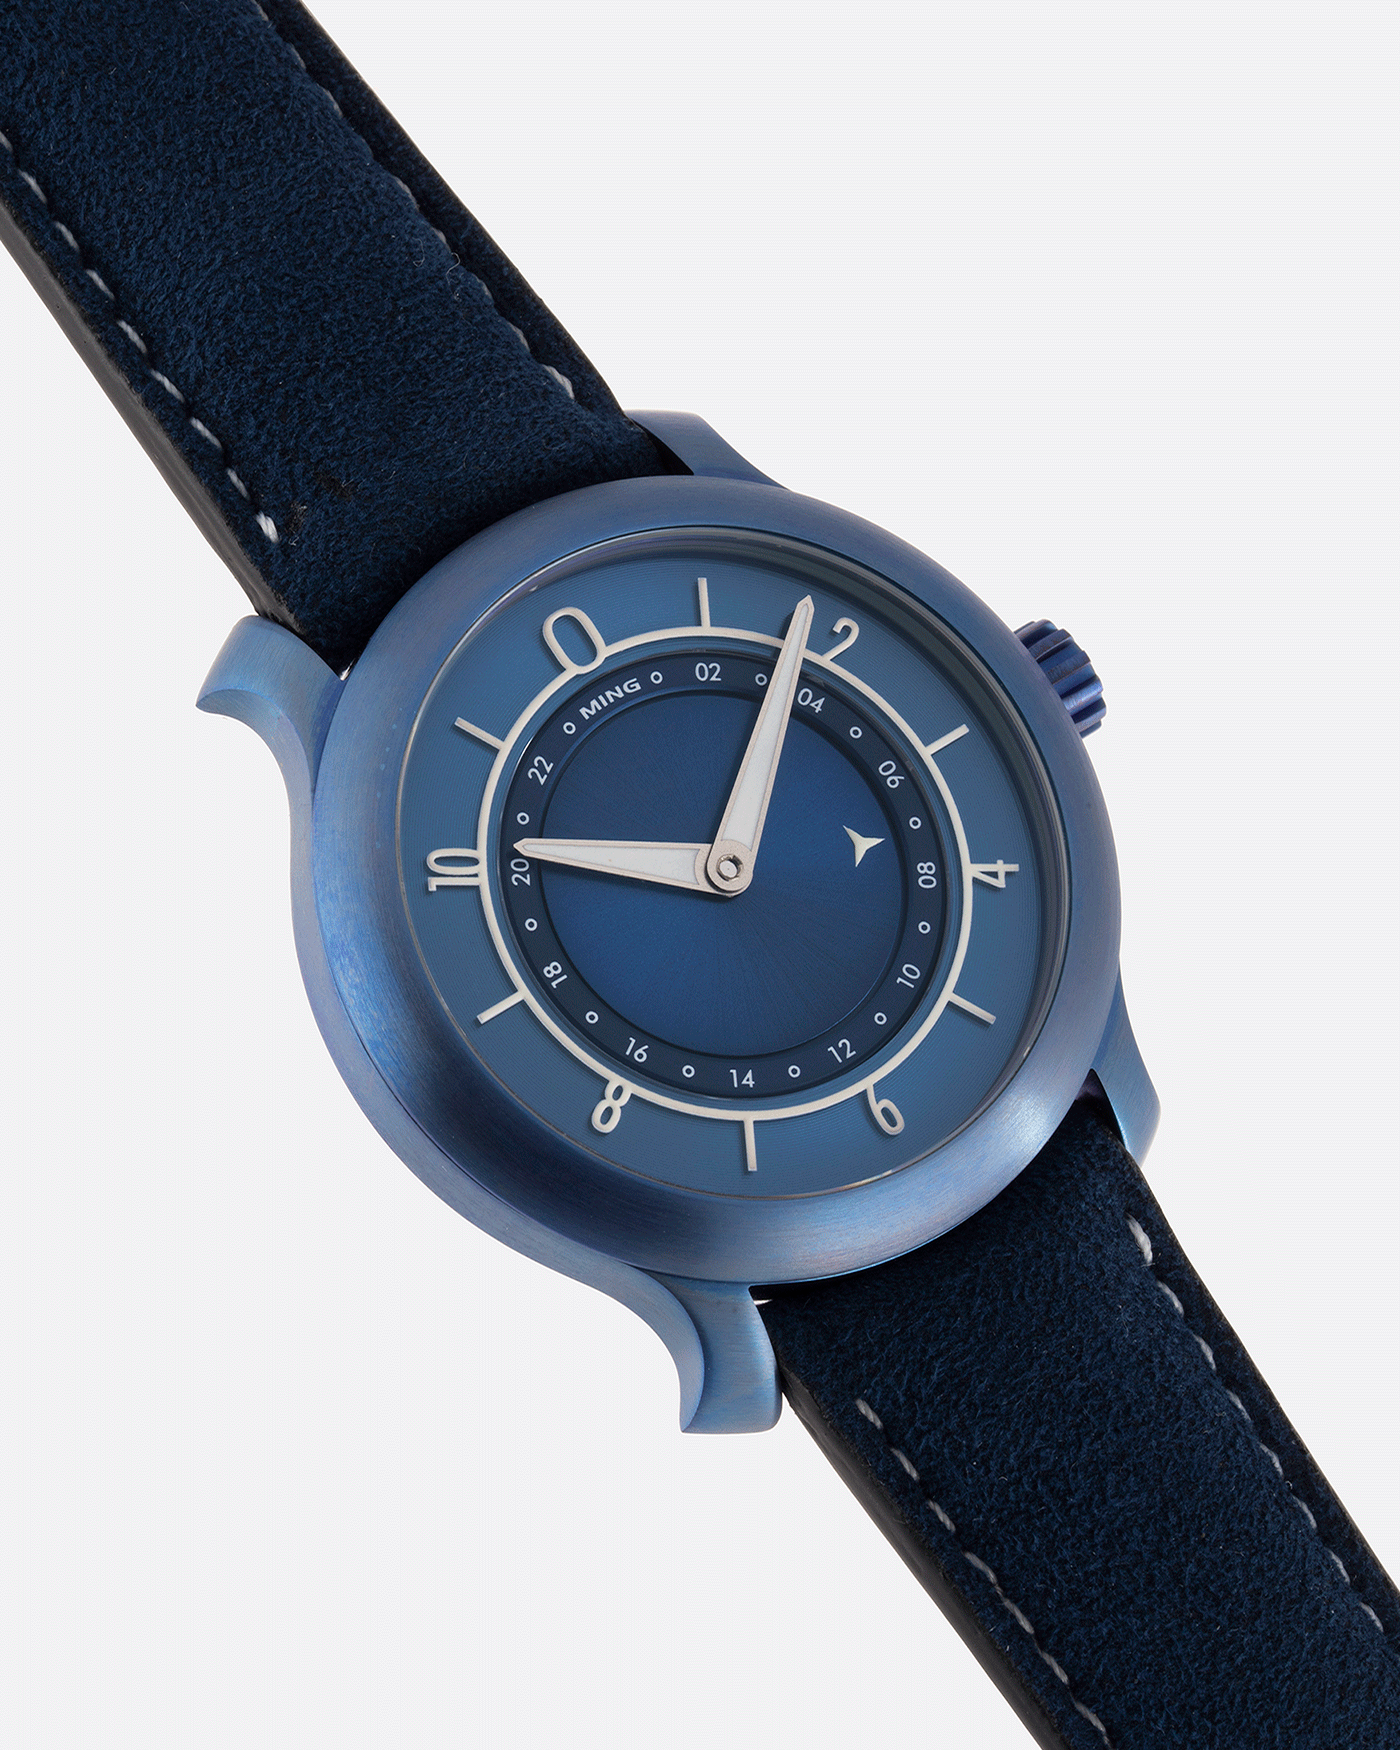 Brand: Ming Year: 2018 Model: 17.03 Material: Grade 2 Titanium Movement: Self-Winding Sellita SW 330-1 Case Diameter: 38mm Strap: Ming Blue Suede Strap and Grade 5 Ultra Blue Titanium Tang Buckle